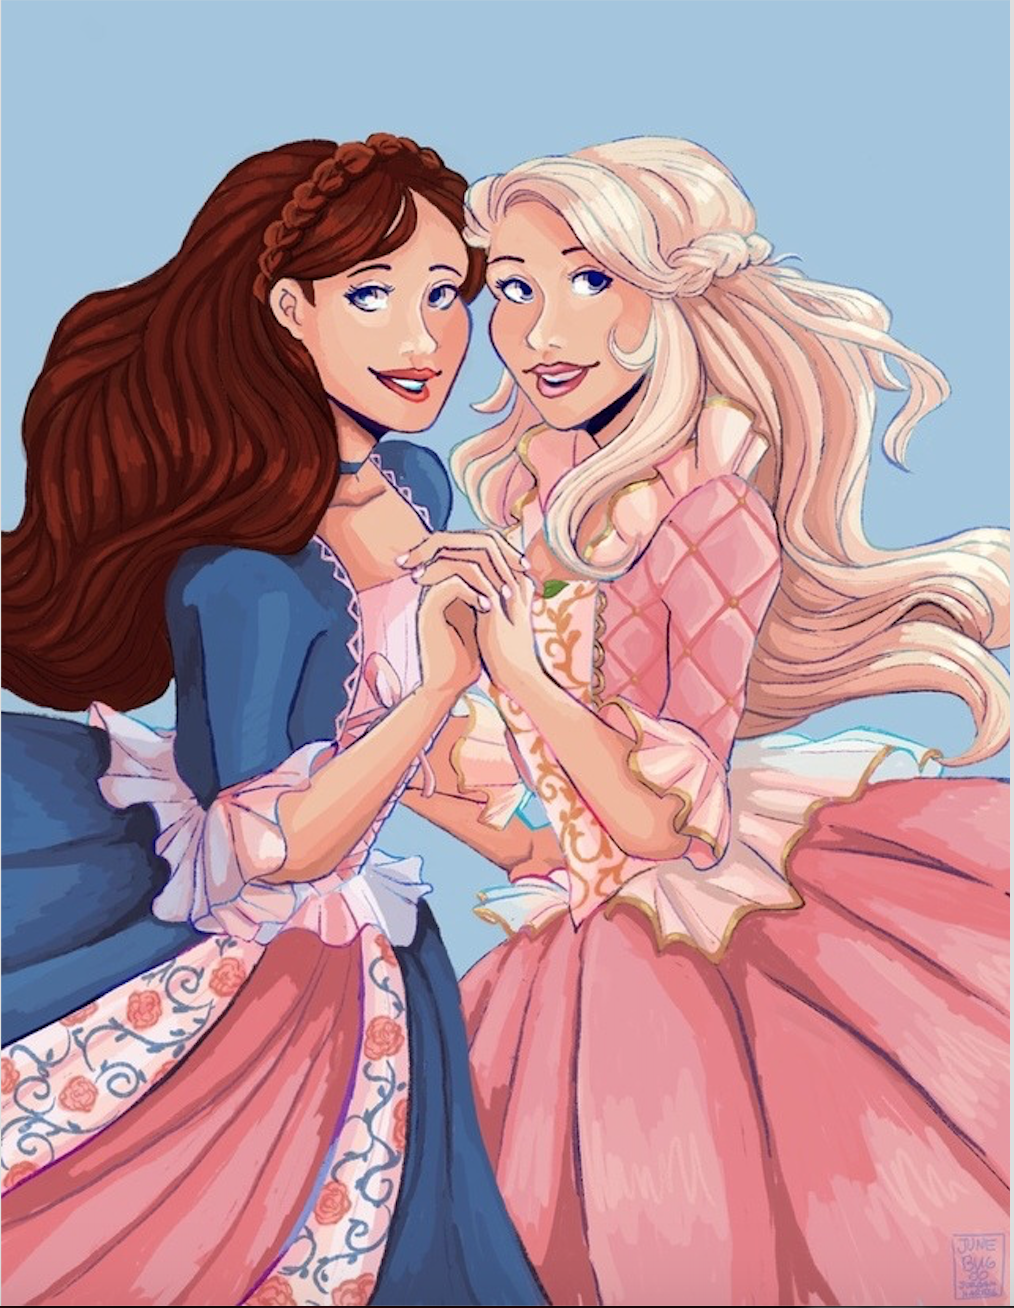 Princess Anneliese and Erika from Barbie as the Princess and the Pauper. Lake art, Barbie swan lake, Princess and the pauper